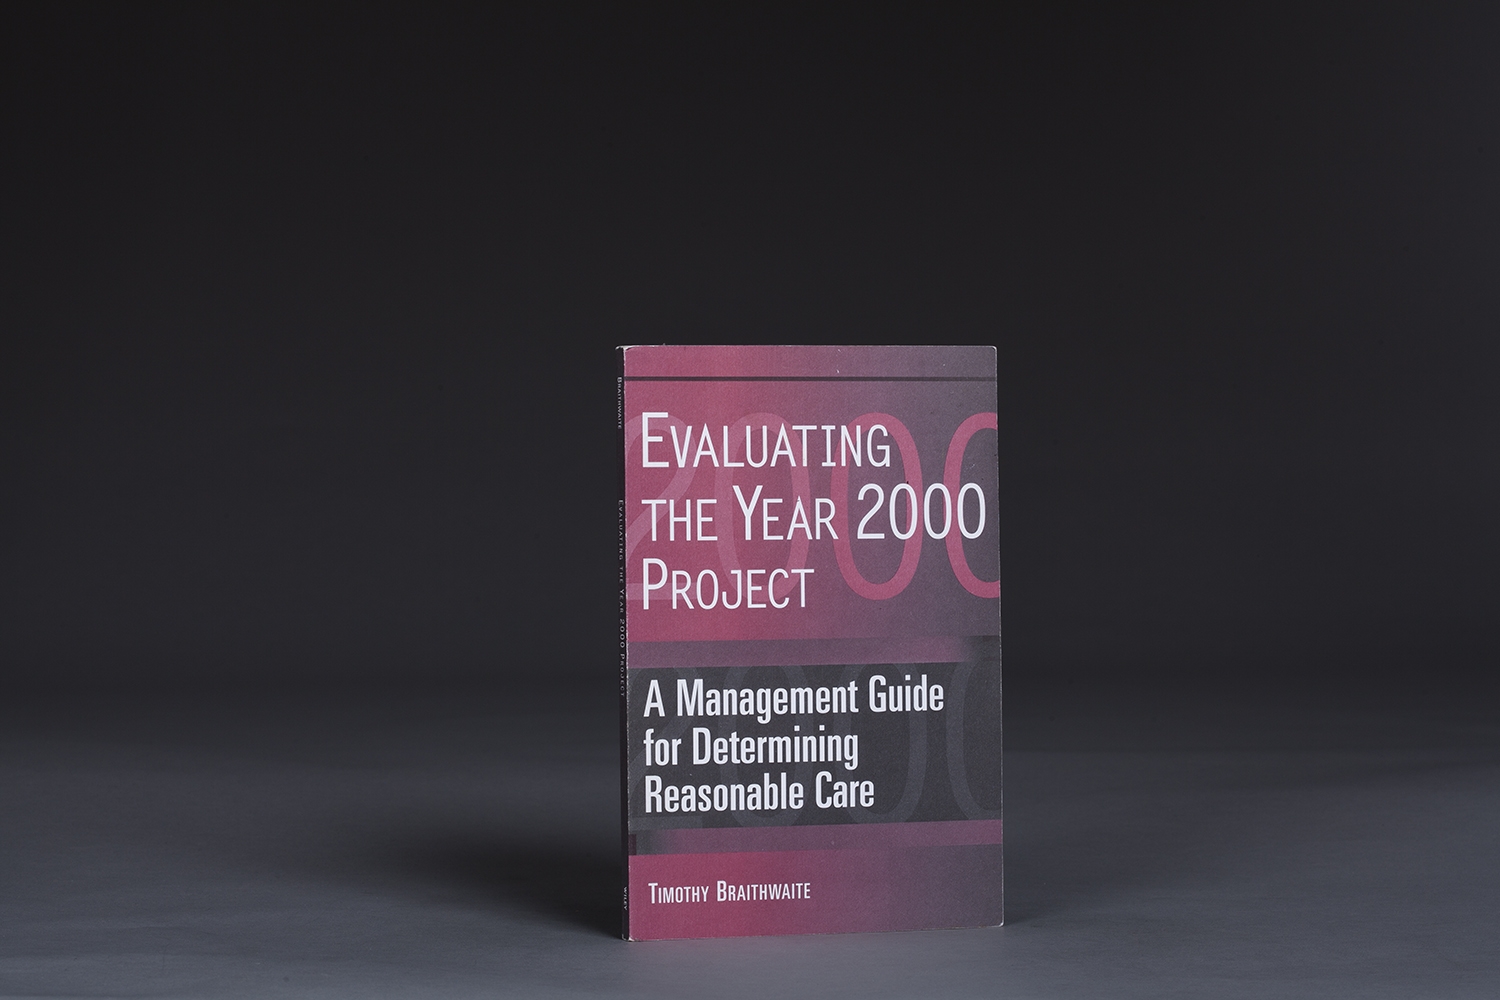 Evaluating the Year 2000 Project - A Management Guide - 0676 Cover.jpg